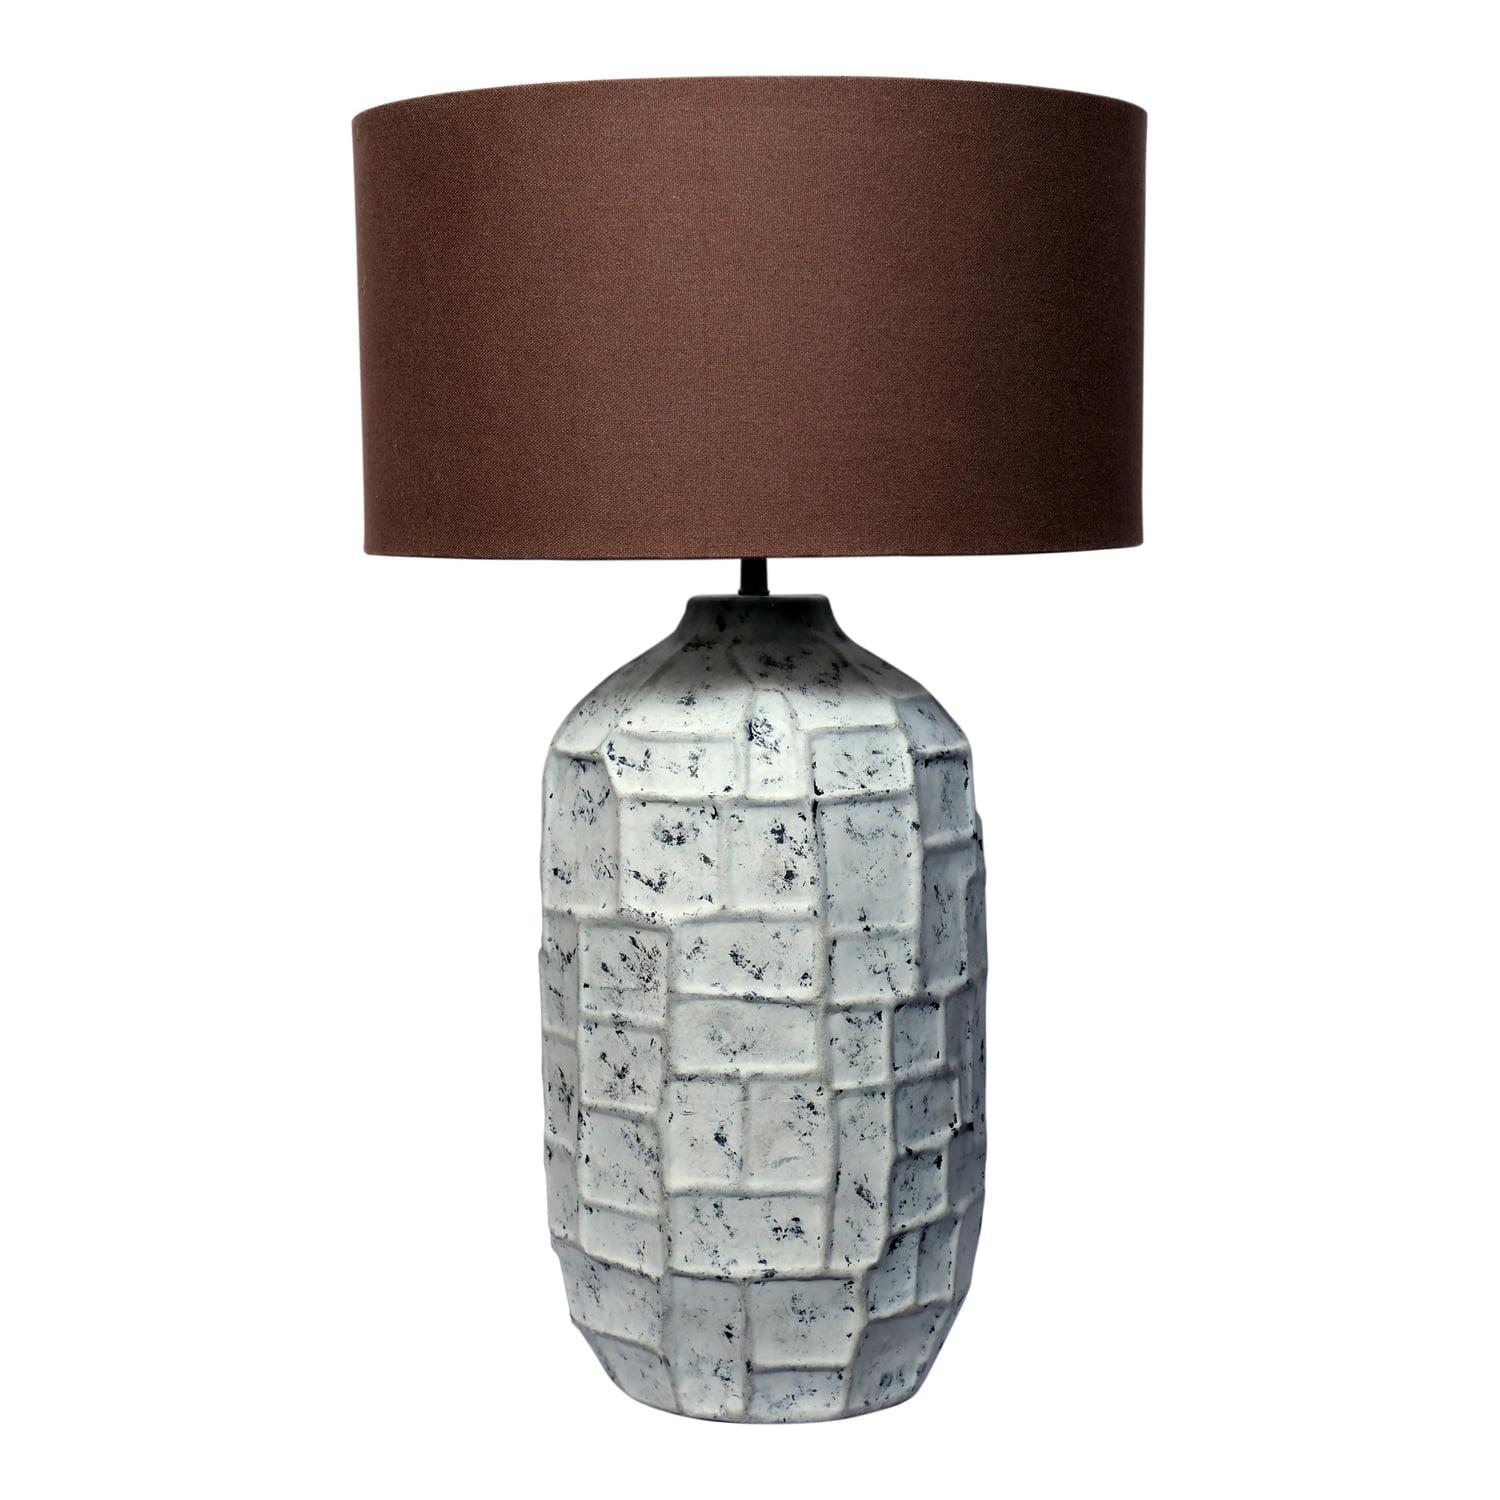 Gray Textured Iron Table Lamp with Brown Shade